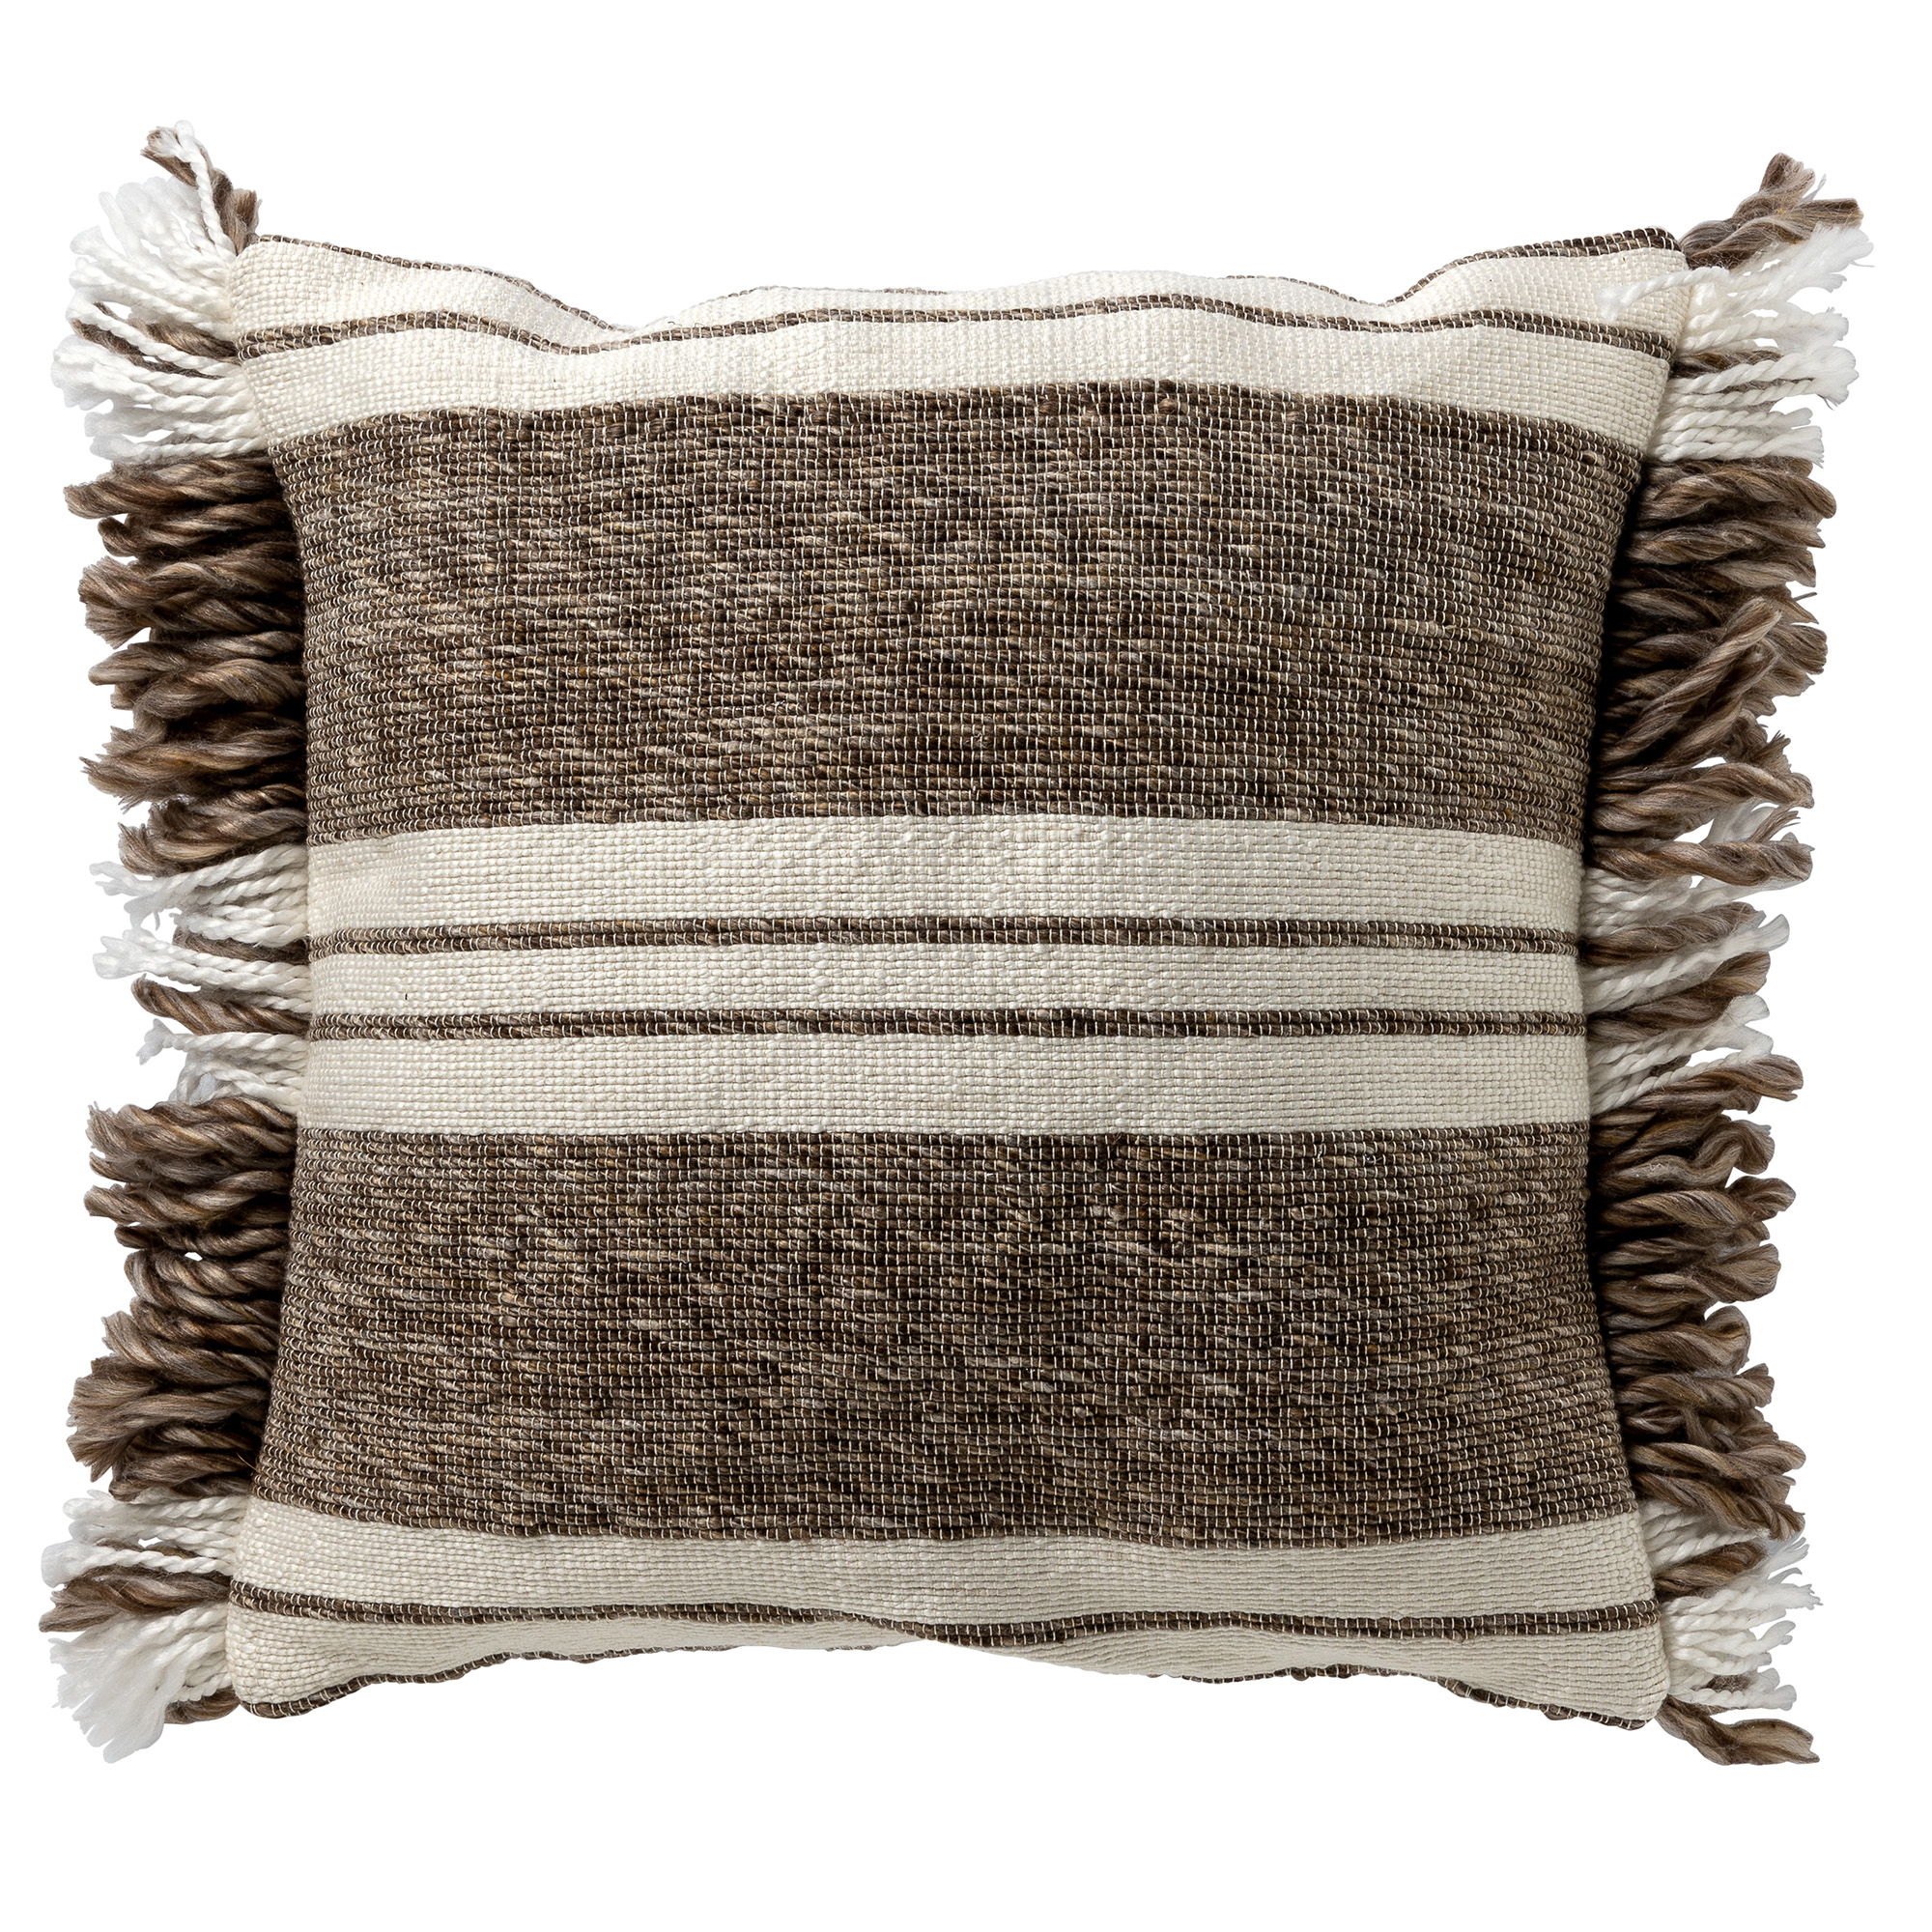 EDGAR - Cushion with cushion cover made of 85% recycled polyester - Eco Line collection 45x45 cm - Driftwood - taupe 